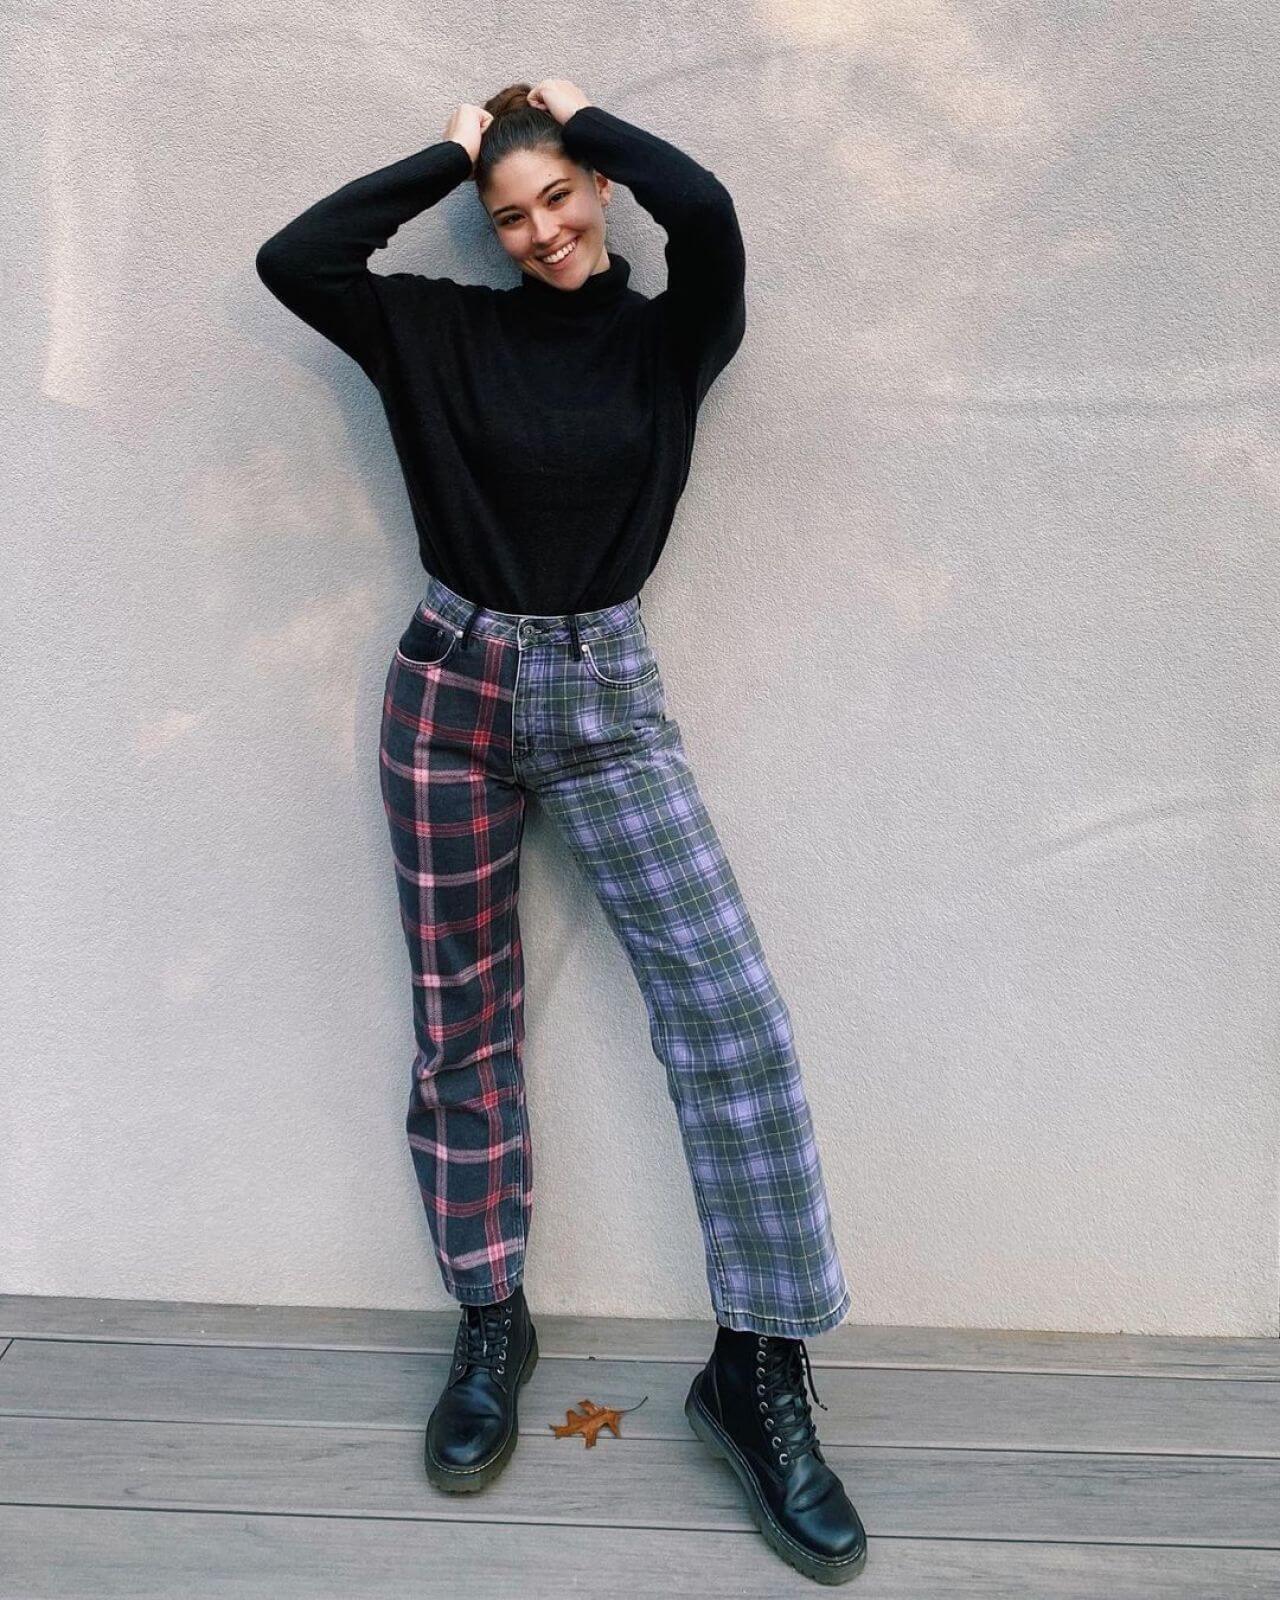 Abigail Canelle Casual Look In Vintage Pants & Black Turtle Neck Sweater